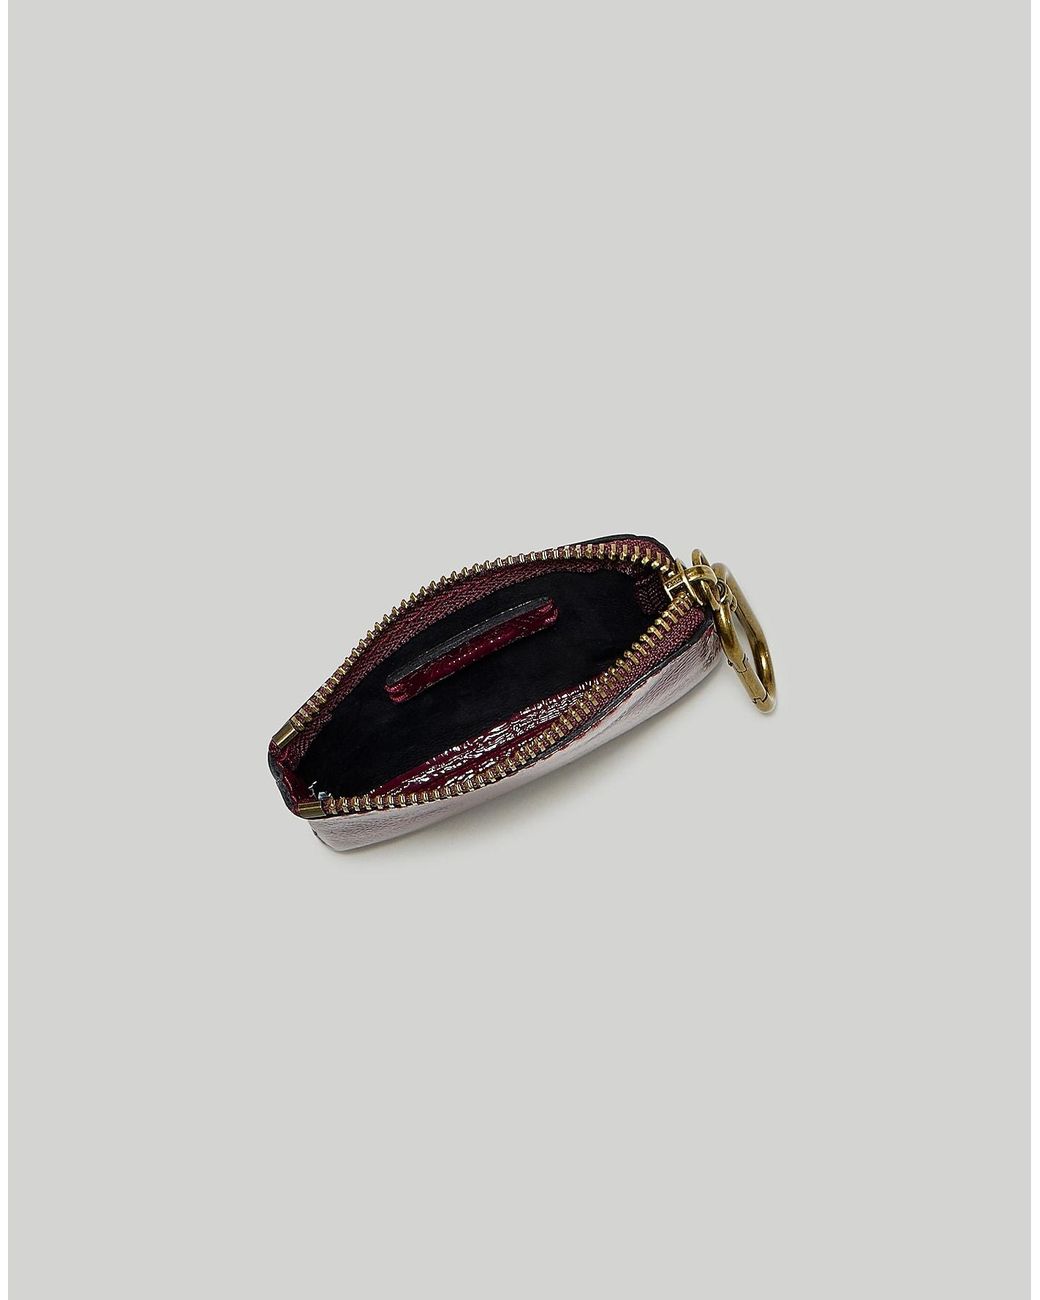 The Leather Carabiner Mini Pouch